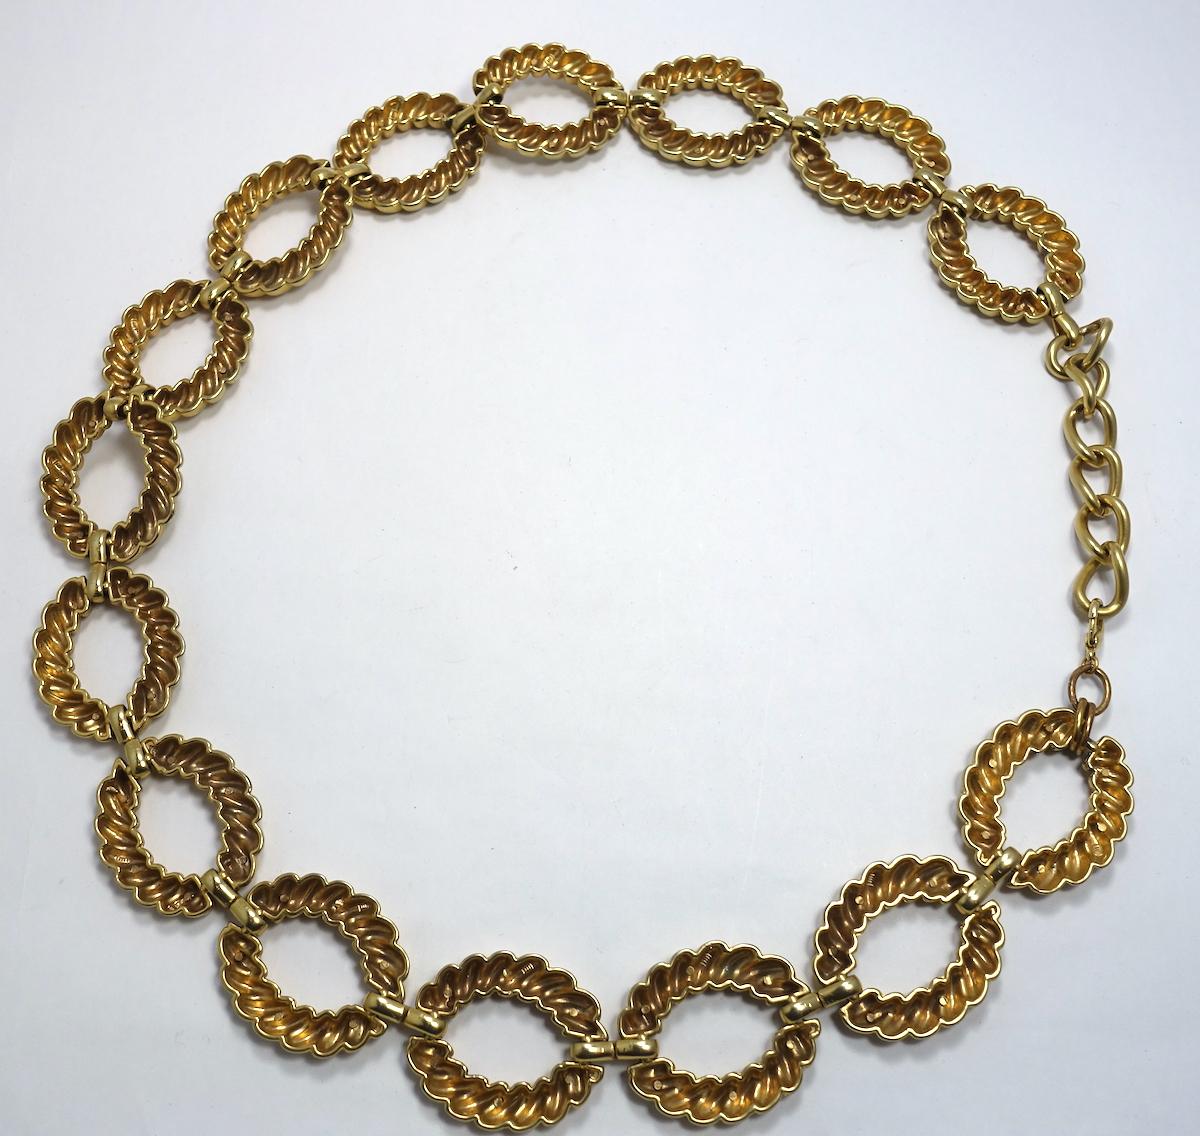 This vintage 1960s belt features a ribbed large link design in a gold tone metal setting.  In excellent condition, this belt measures 37” x 1-3/4” with an adjustable spring closure.